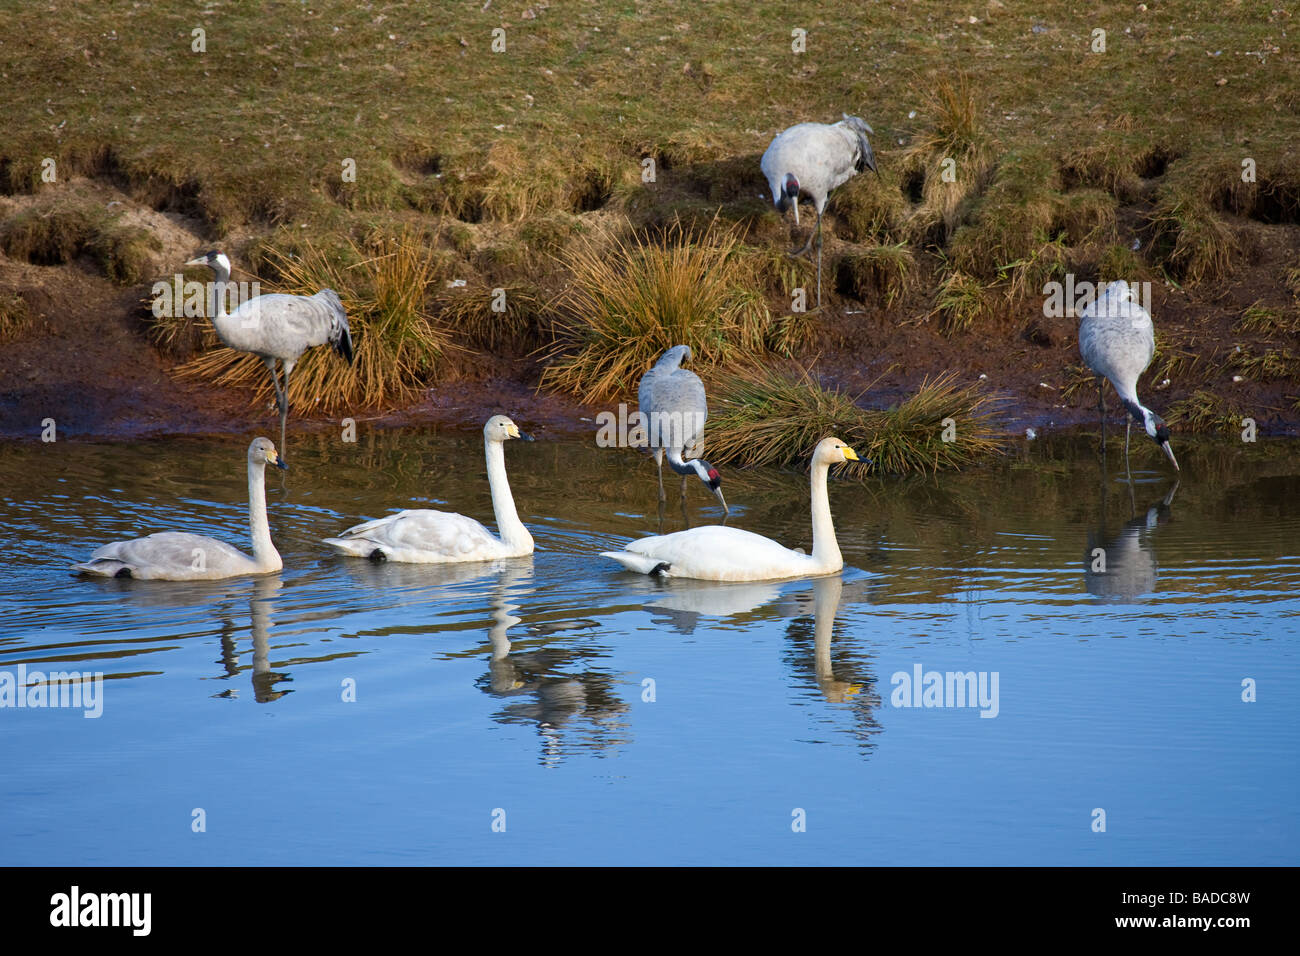 Cranes (Grus grus) coming down to drink and a family of Whooper Swans (Cygnus cygnus) Stock Photo